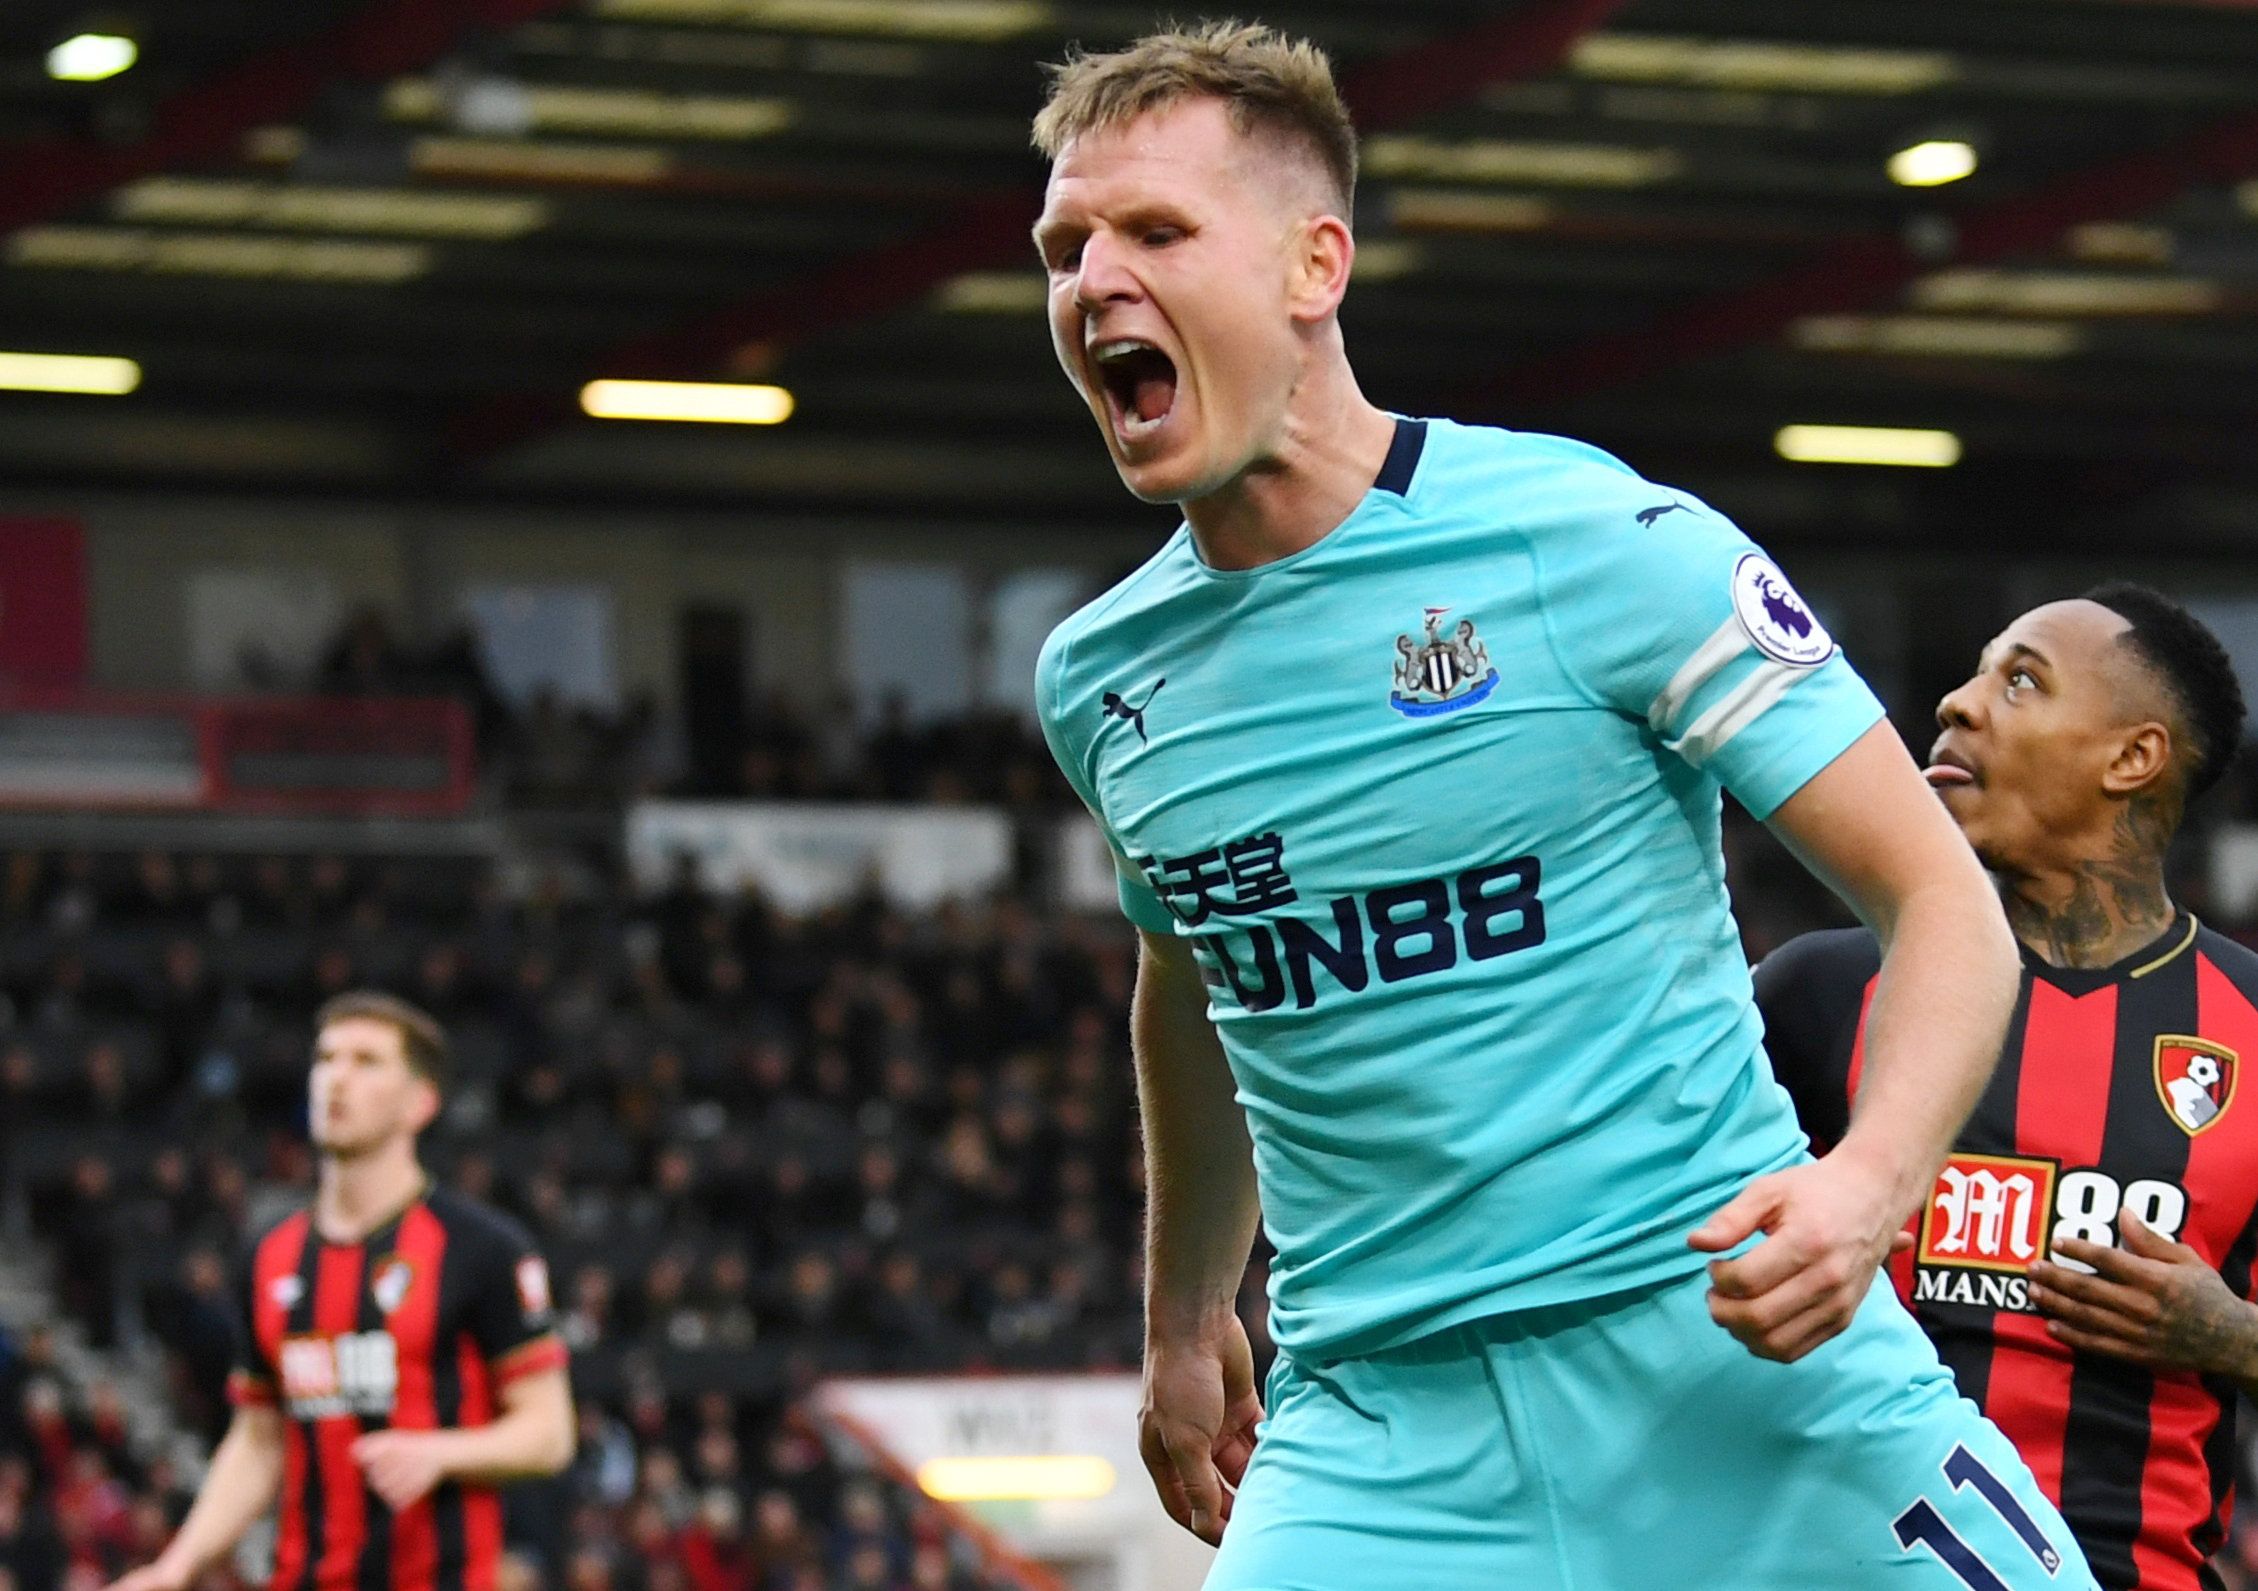 Soccer Football - Premier League - AFC Bournemouth v Newcastle United - Vitality Stadium, Bournemouth, Britain - March 16, 2019 Newcastle United's Matt Ritchie reacts after missing a chance to score  REUTERS/Dylan Martinez  EDITORIAL USE ONLY. No use with unauthorized audio, video, data, fixture lists, club/league logos or 